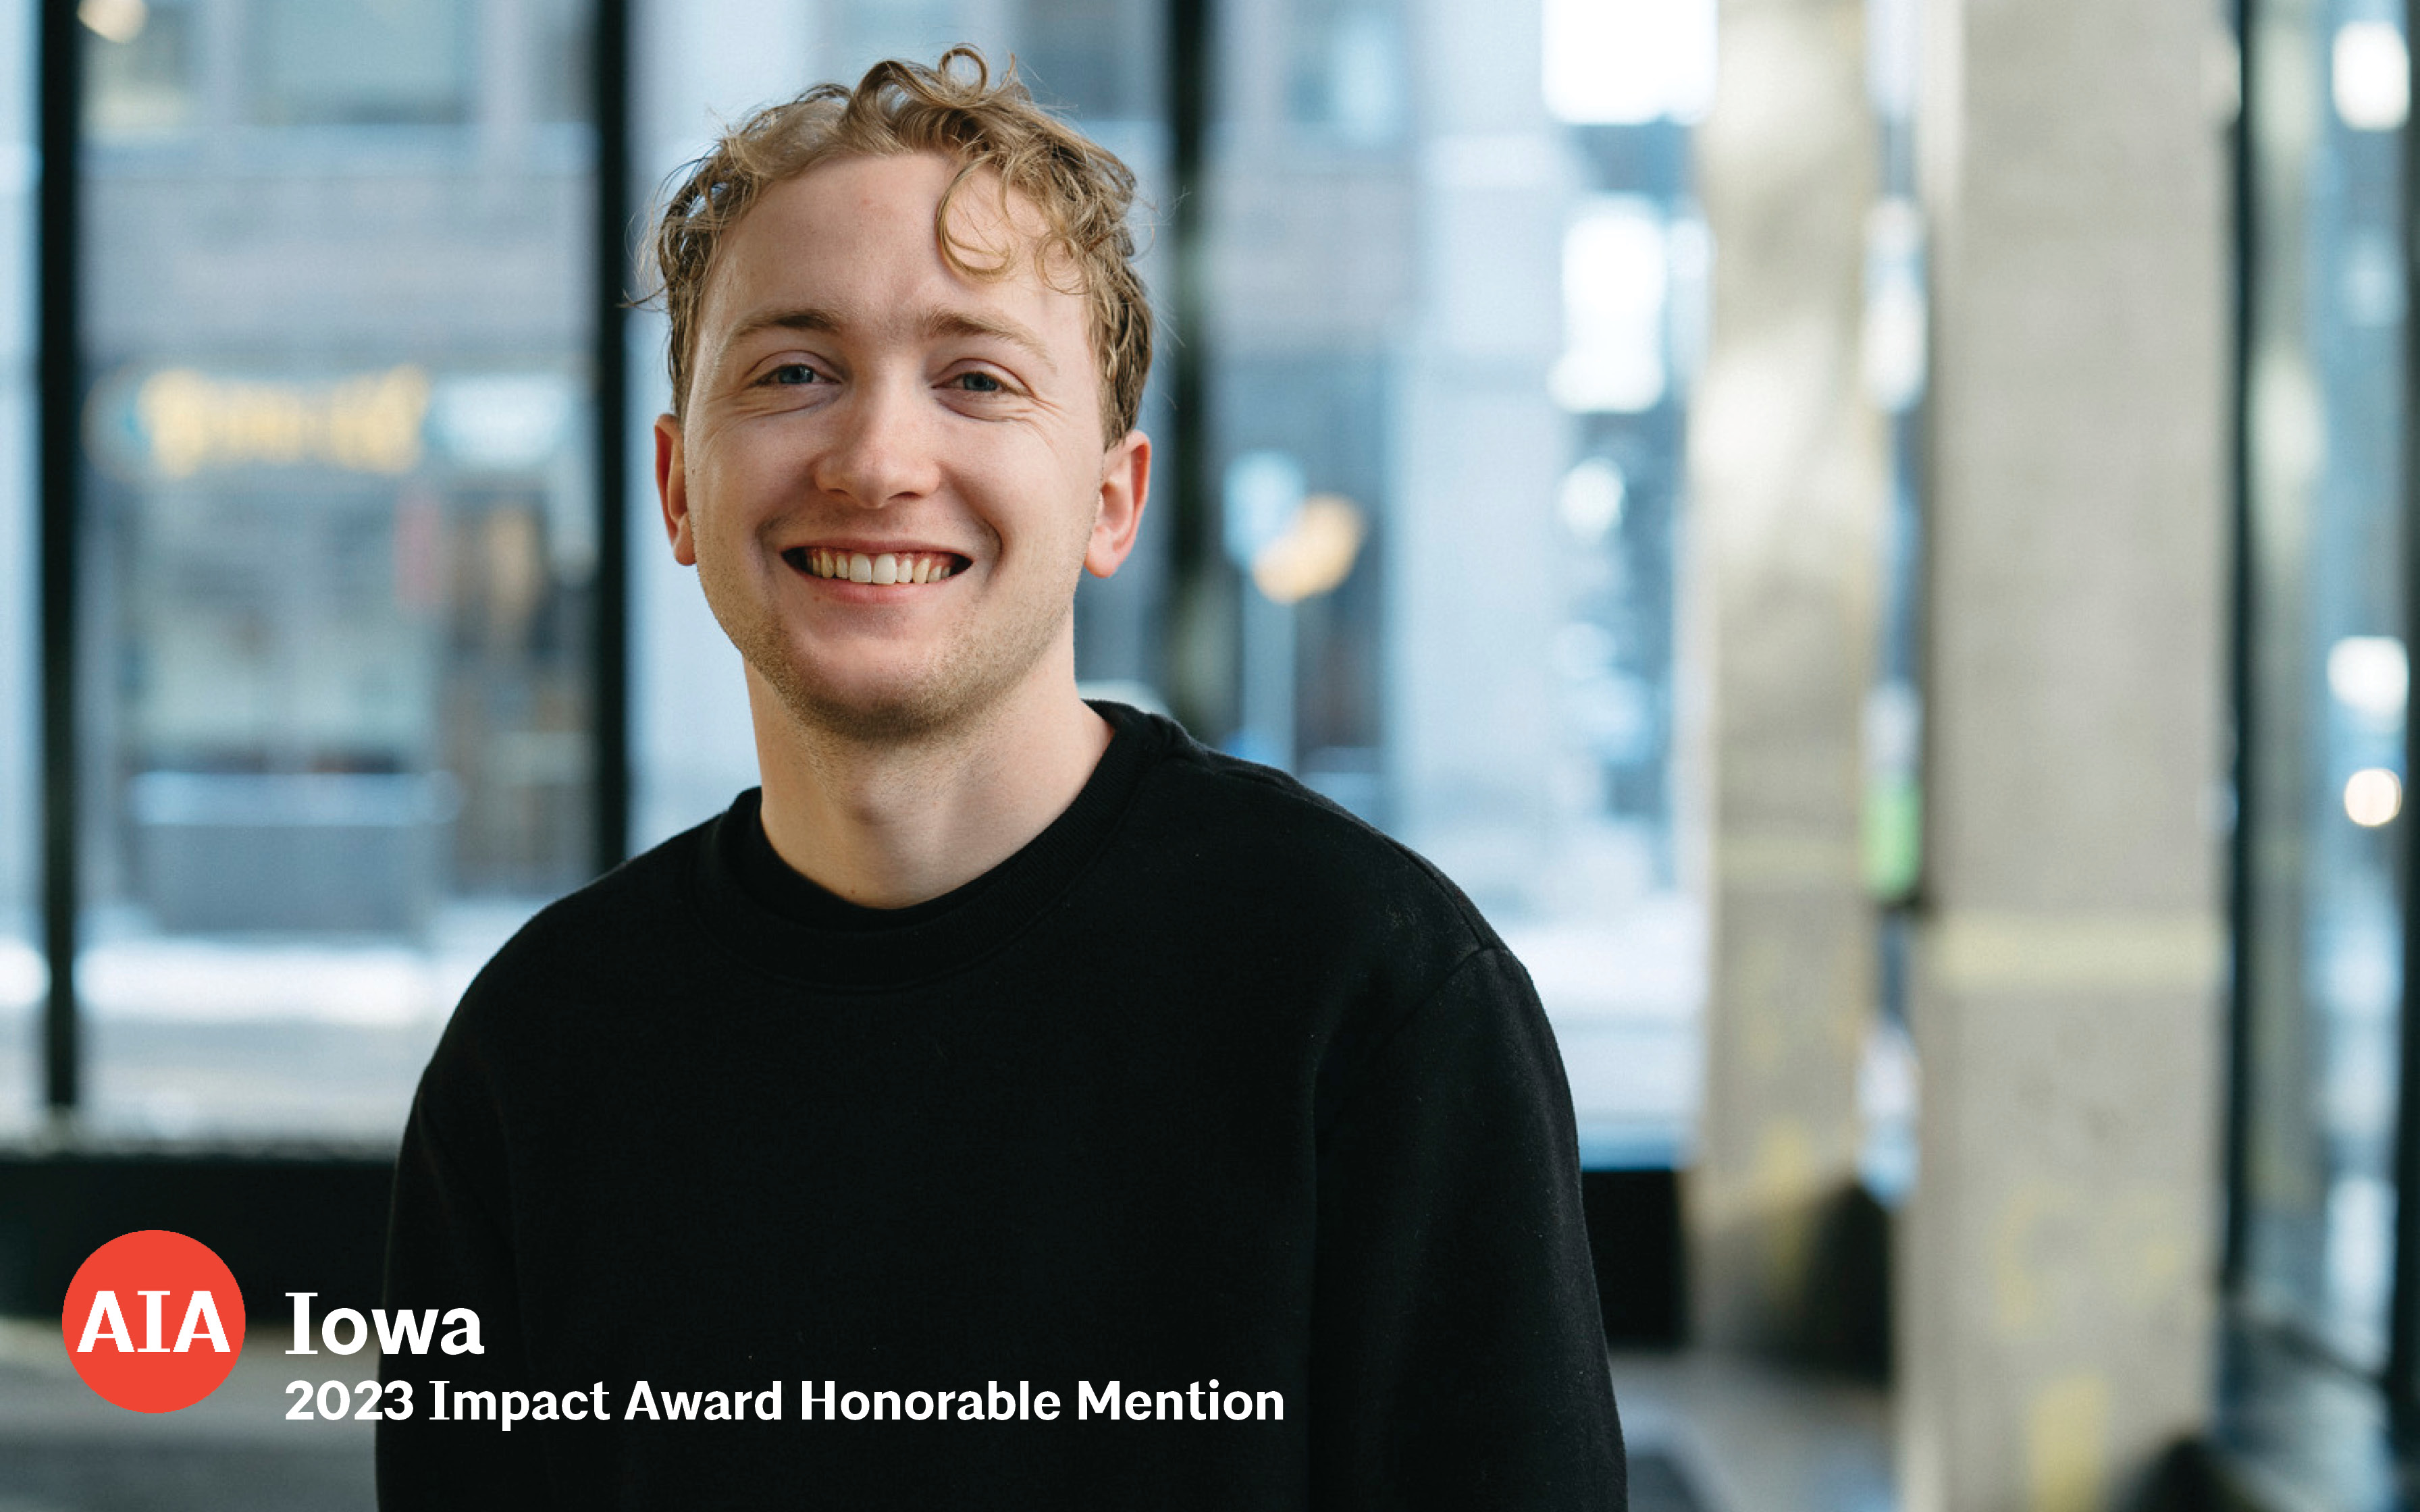 Sam Nordmeyer Honored with AIA Iowa Impact Award for Project Addressing Food Insecurity